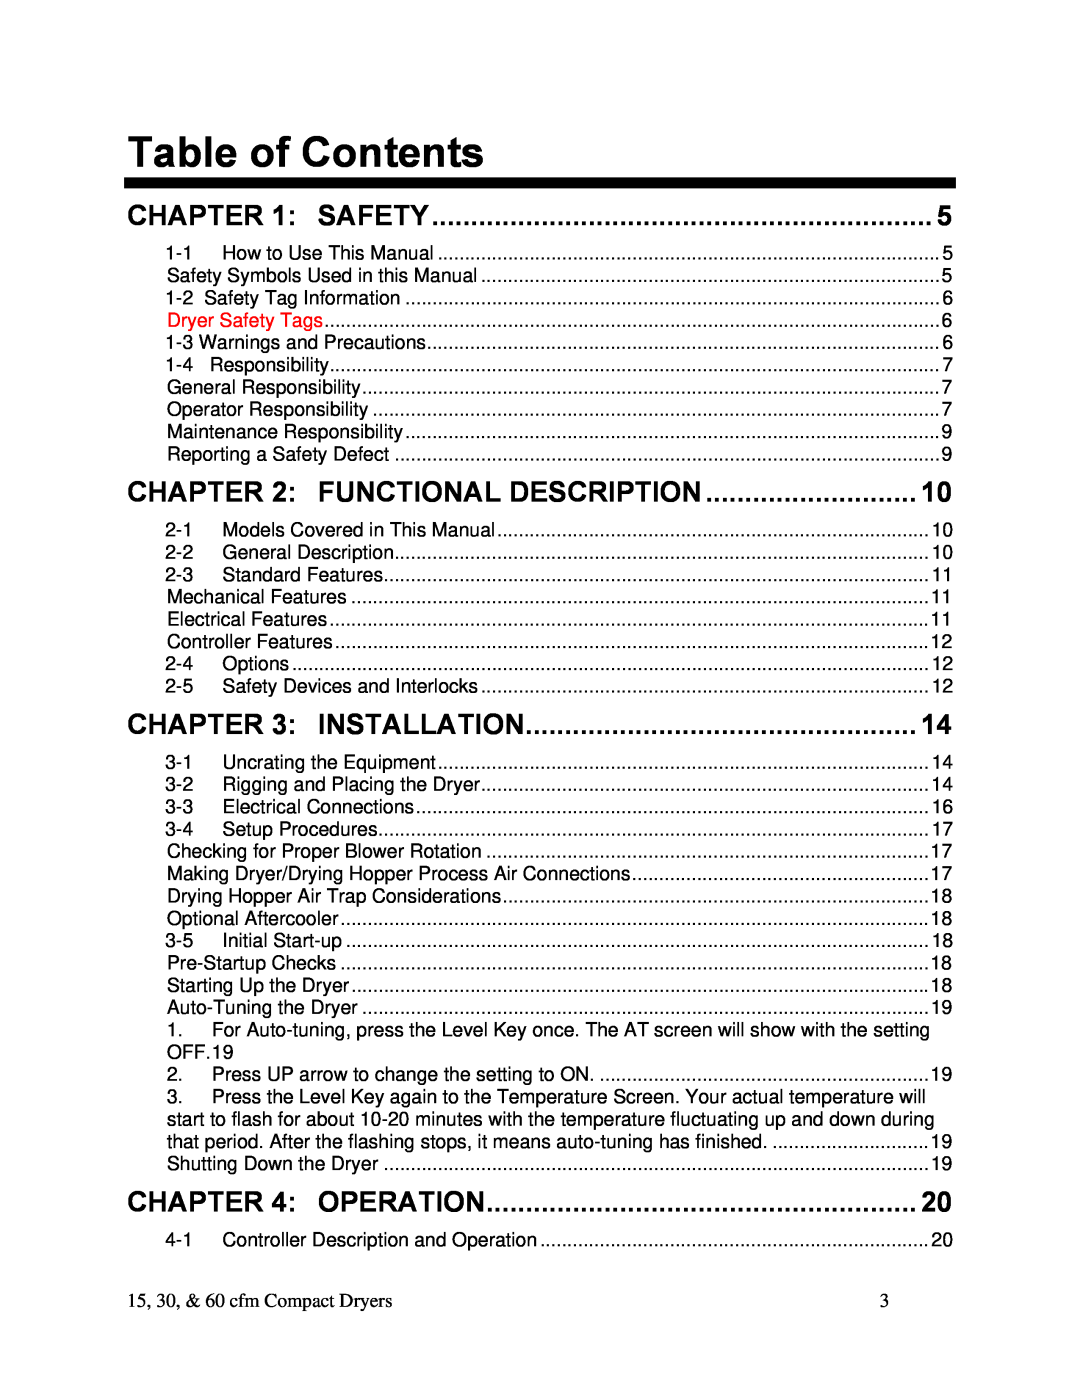 Sterling SDA Series 25-100 15 cfm, 60 cfm Table of Contents, Operation, Safety, Functional Description, Installation 